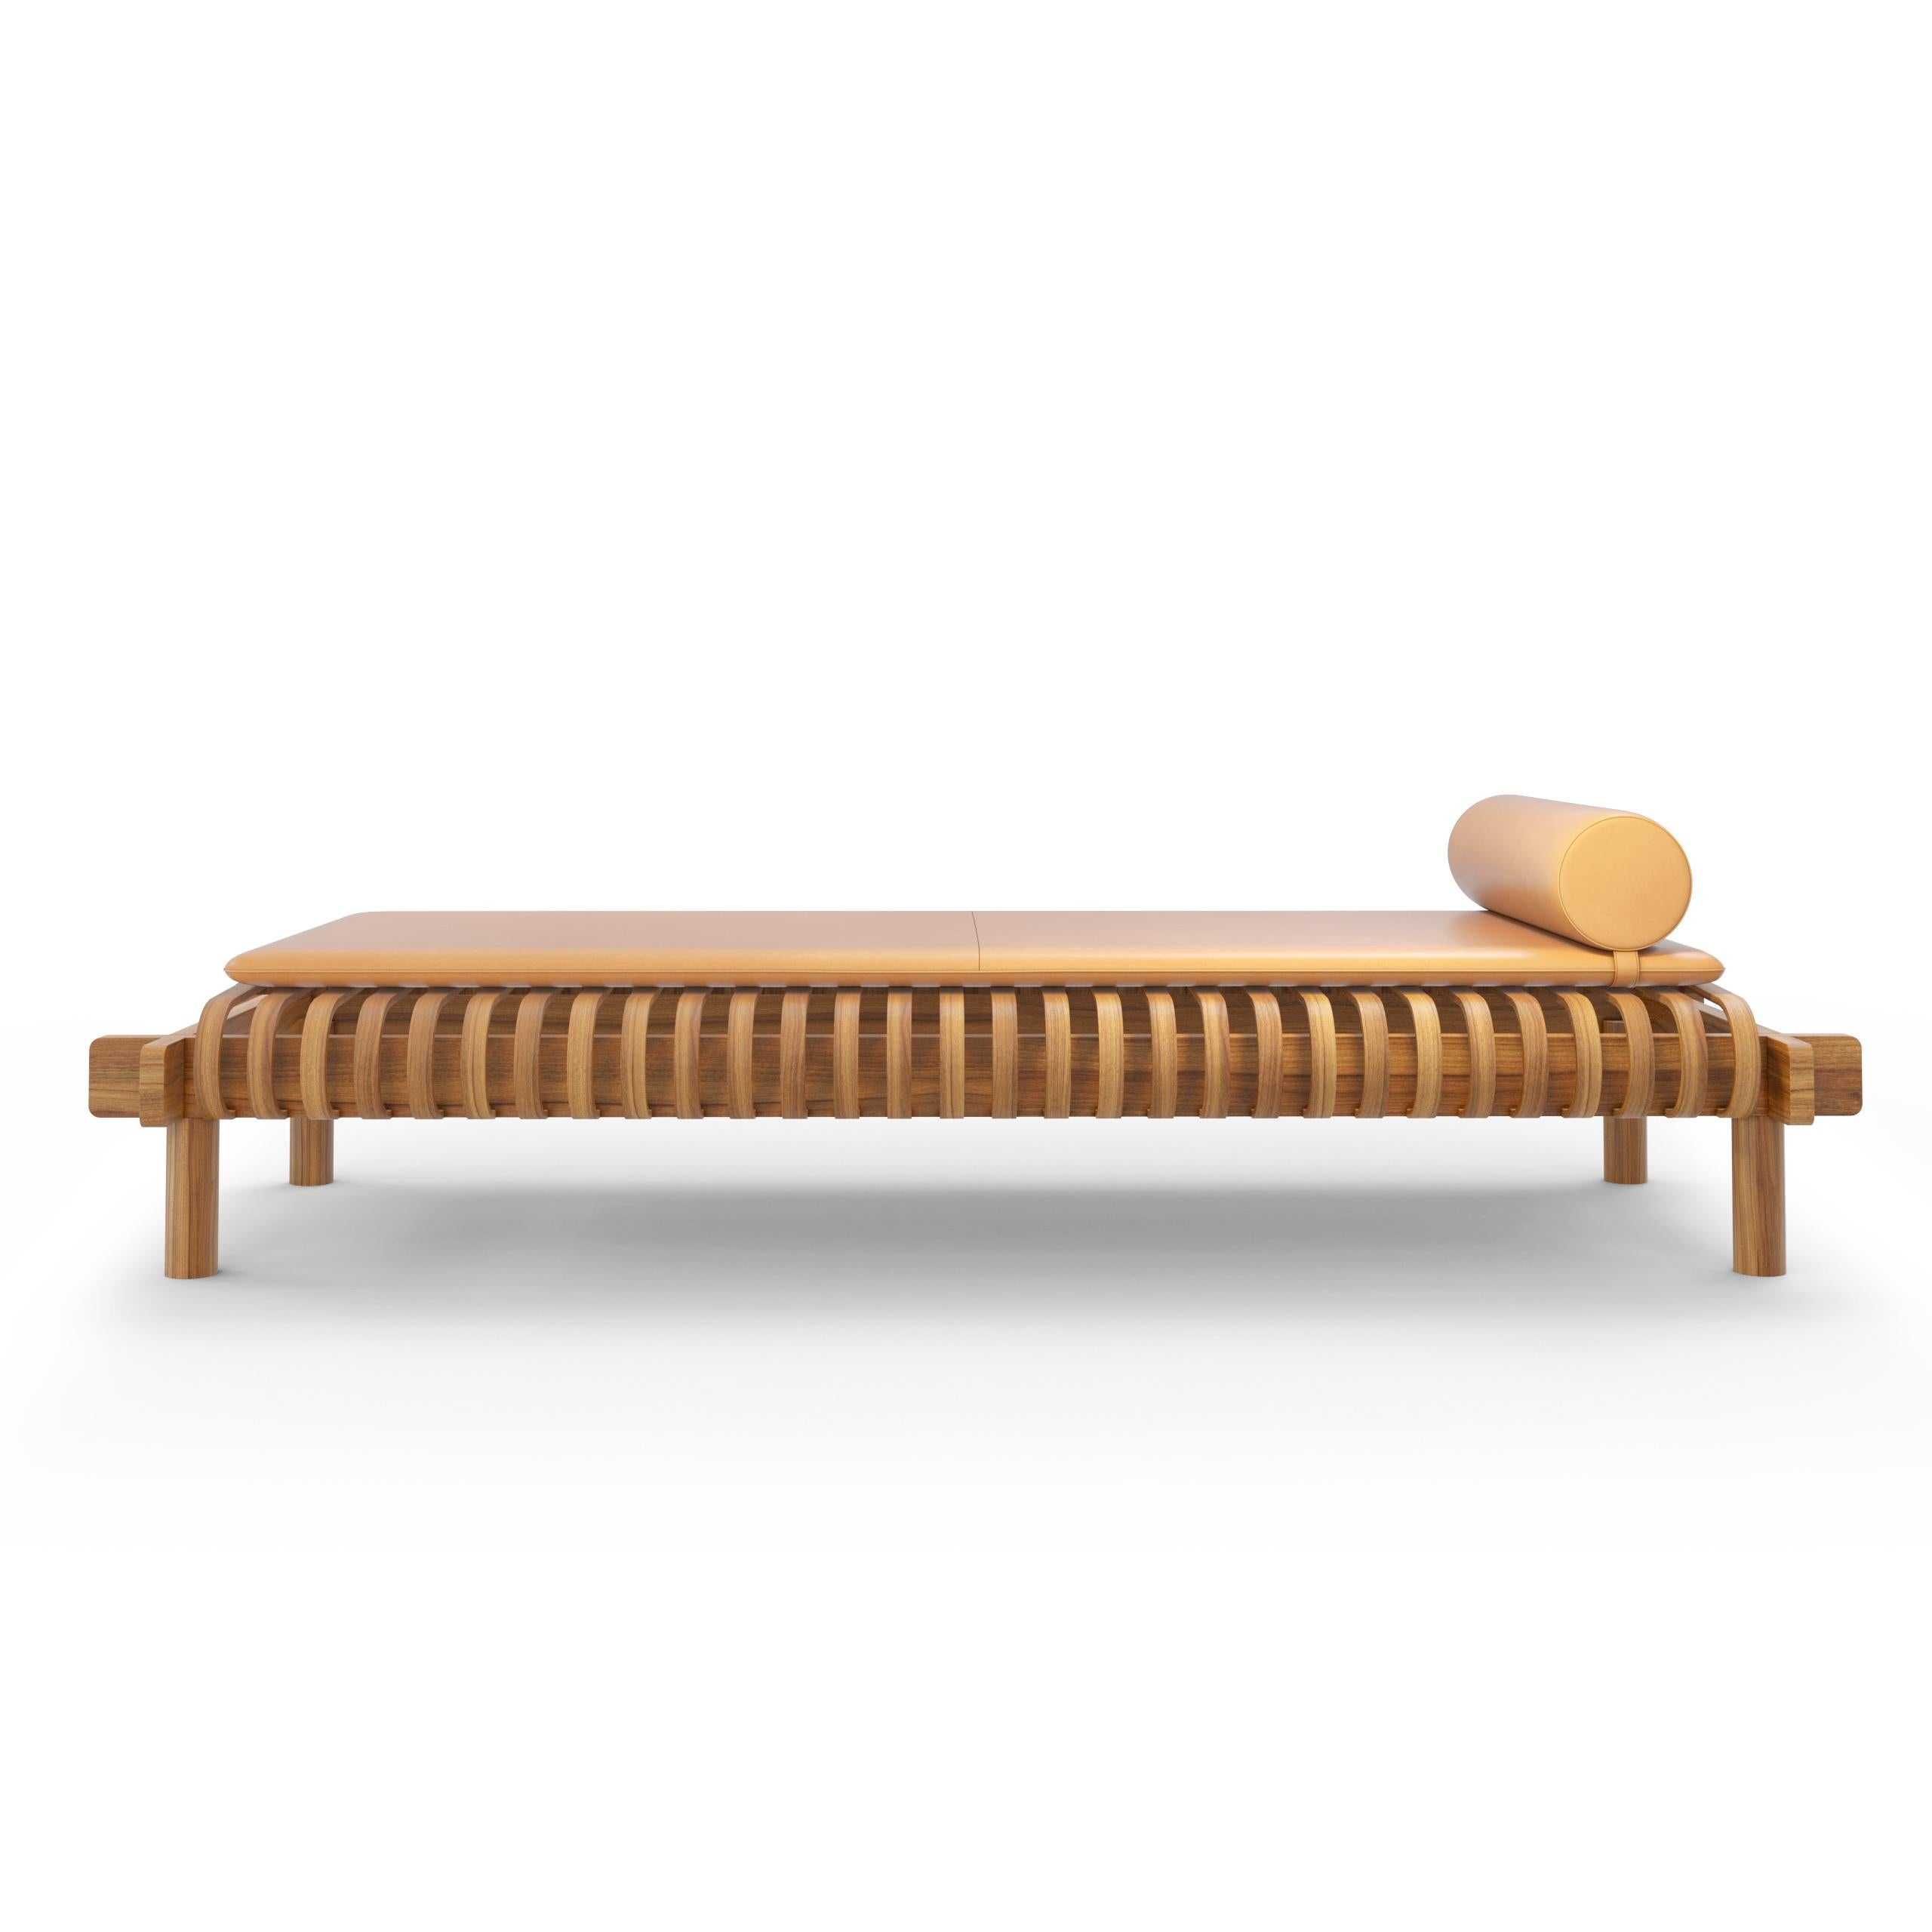 Italian Limited Edition Charlotte Perriand Tokyo Dormeuse by Cassina